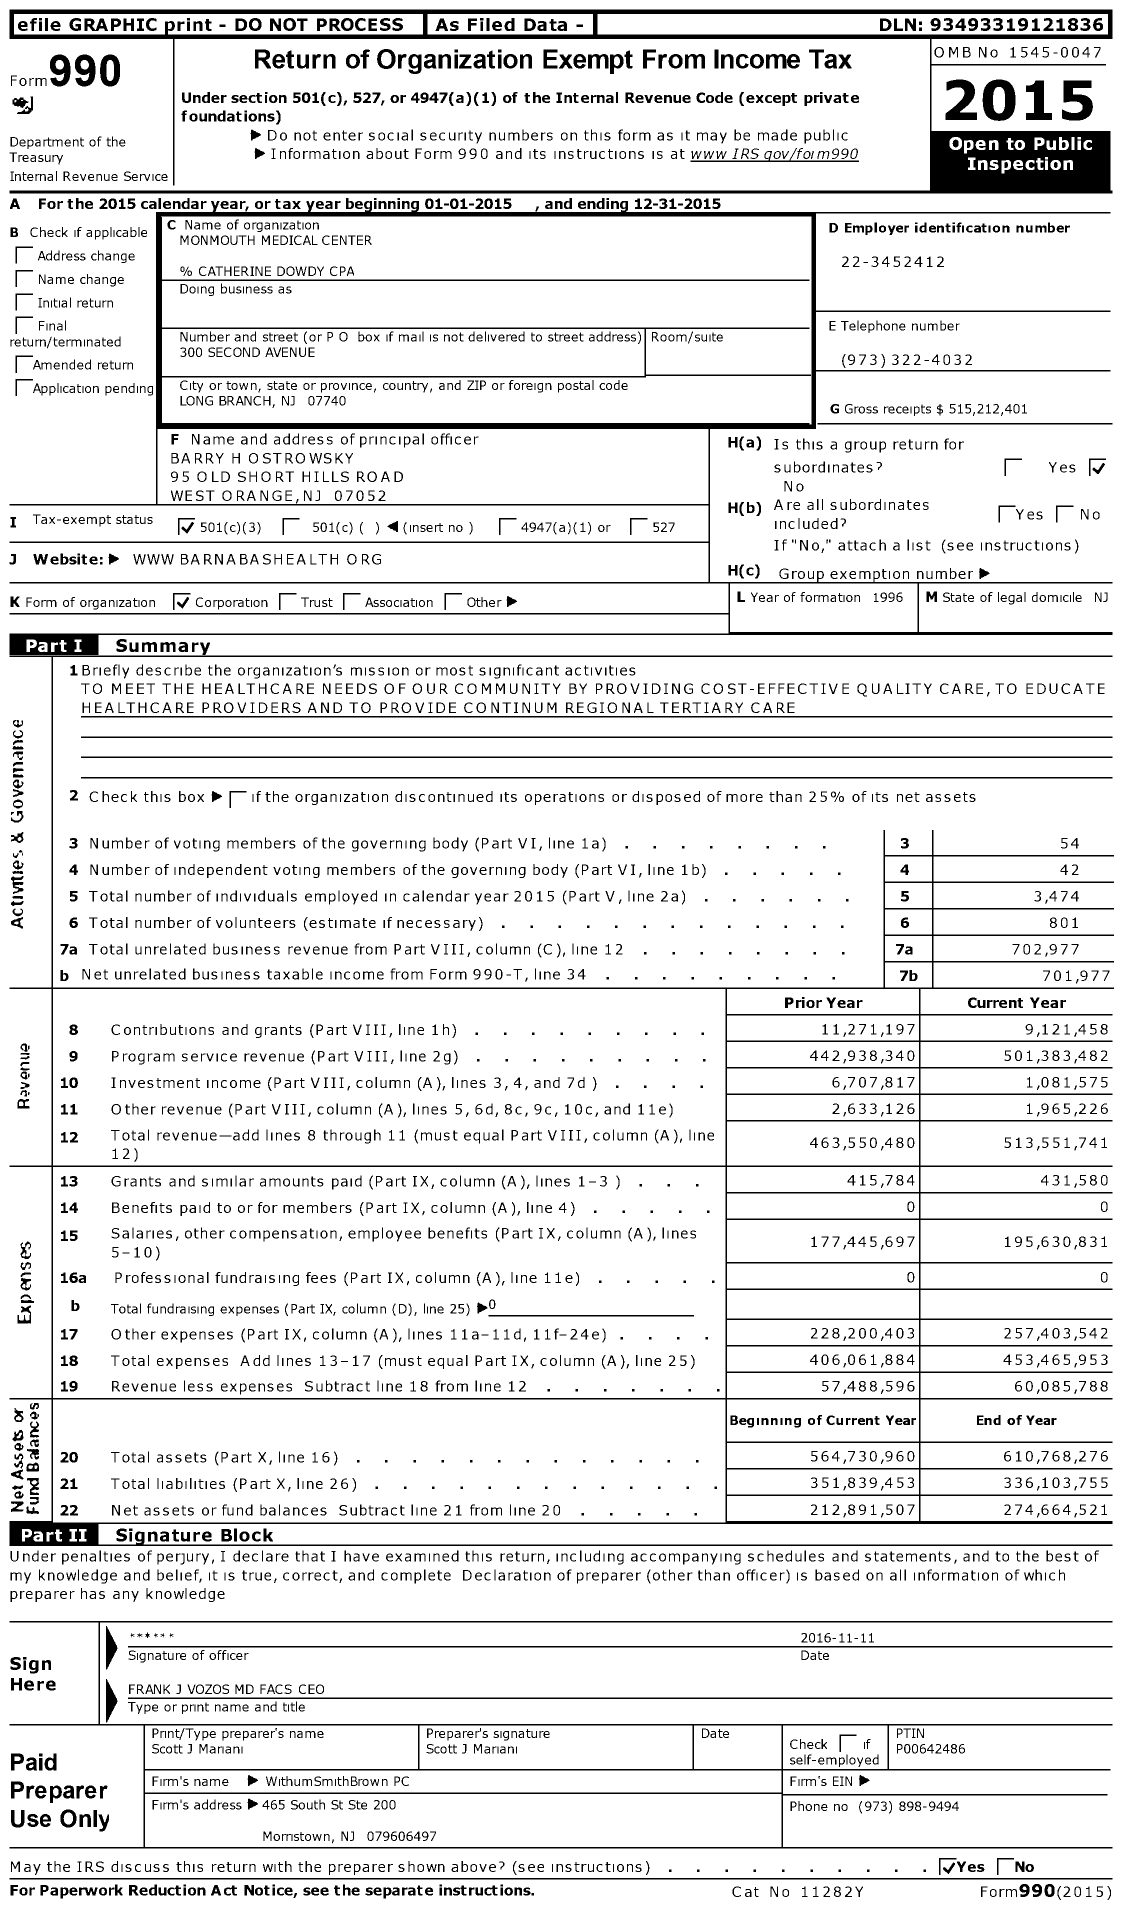 Image of first page of 2015 Form 990 for Monmouth Medical Center (MMC)